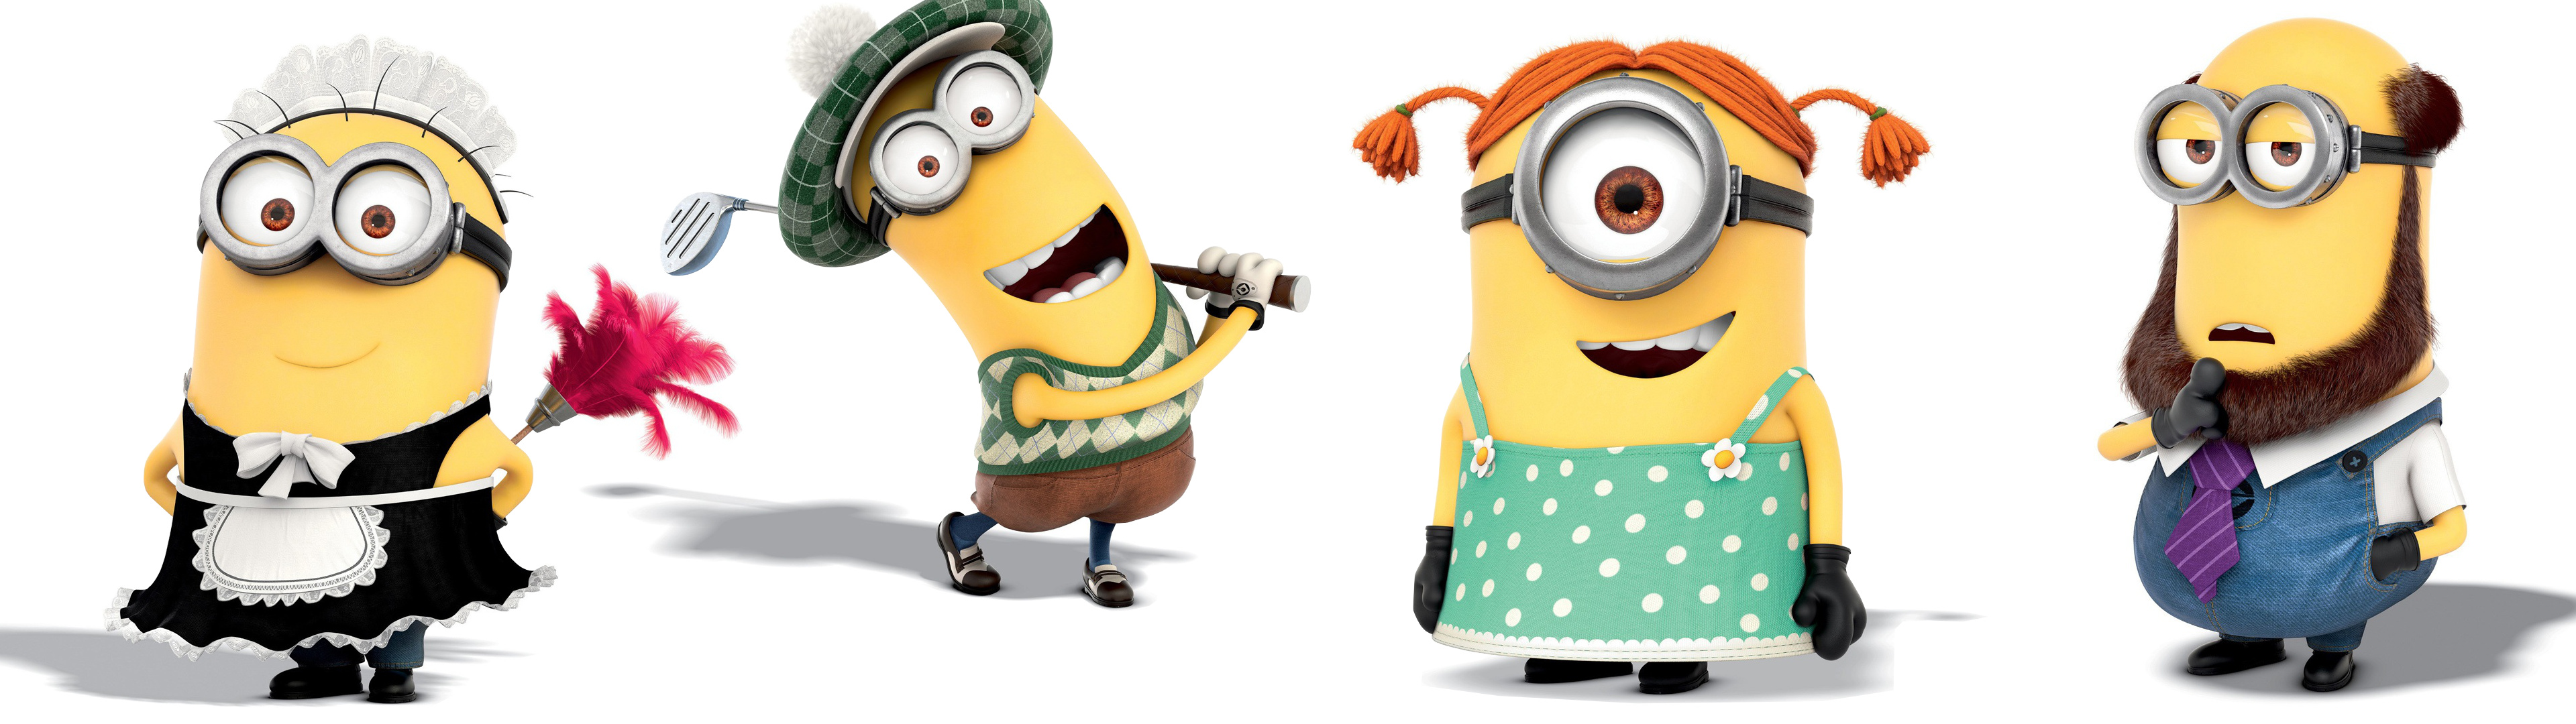 Minions animation, Despicable Me 2, Rmultiwall request, Minions, 3840x1080 Dual Screen Desktop